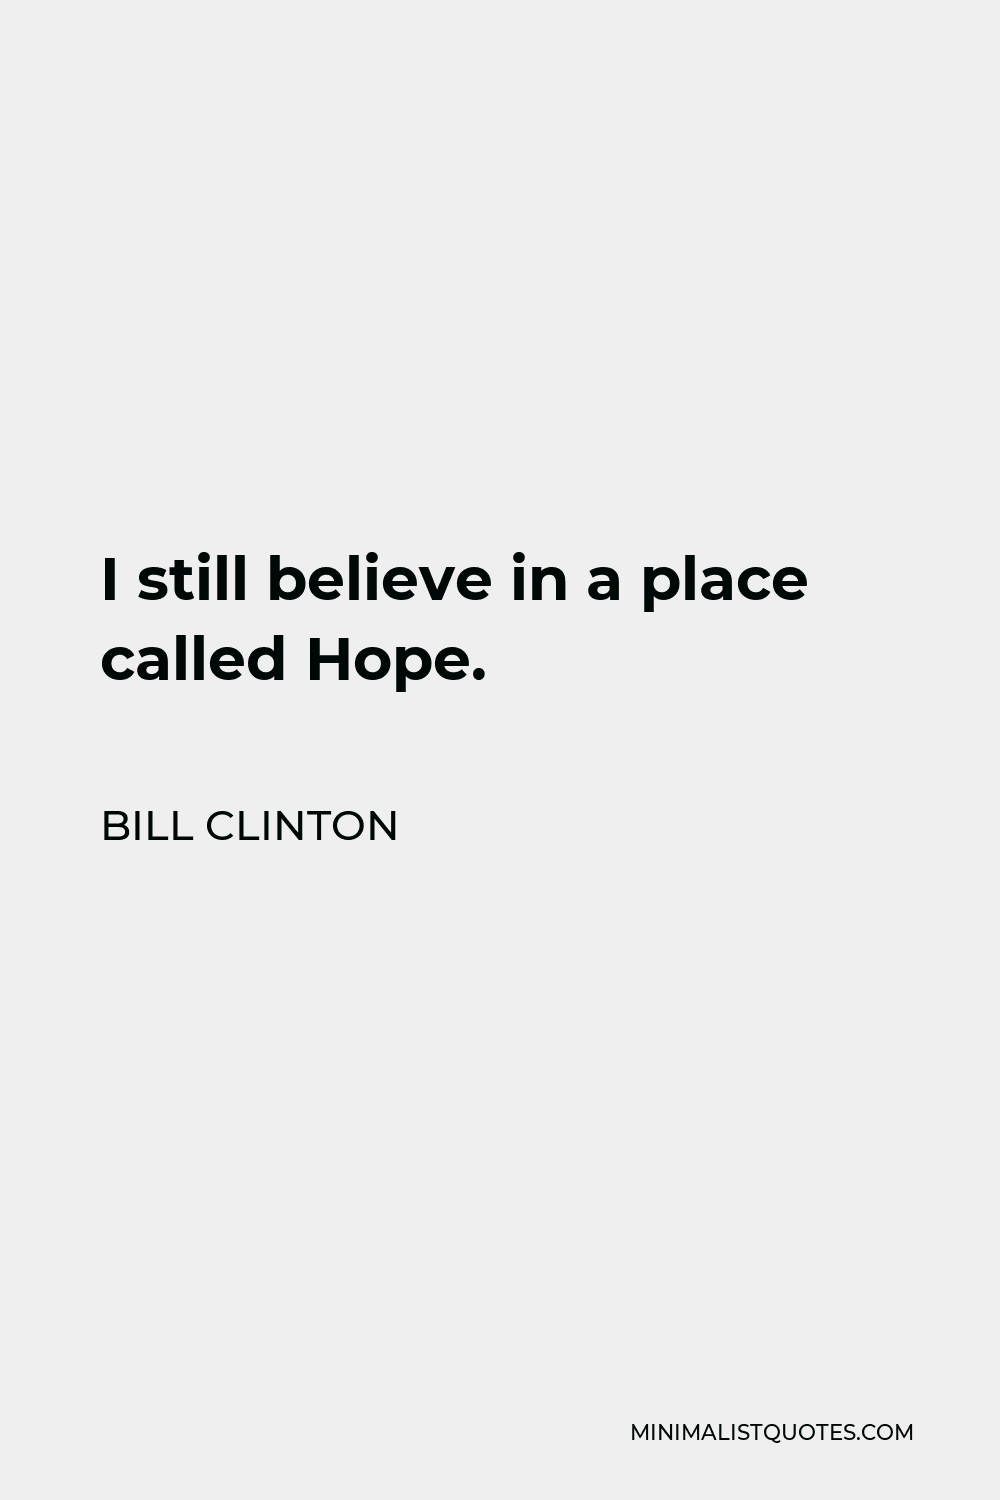 Bill Clinton Quote - I still believe in a place called Hope.